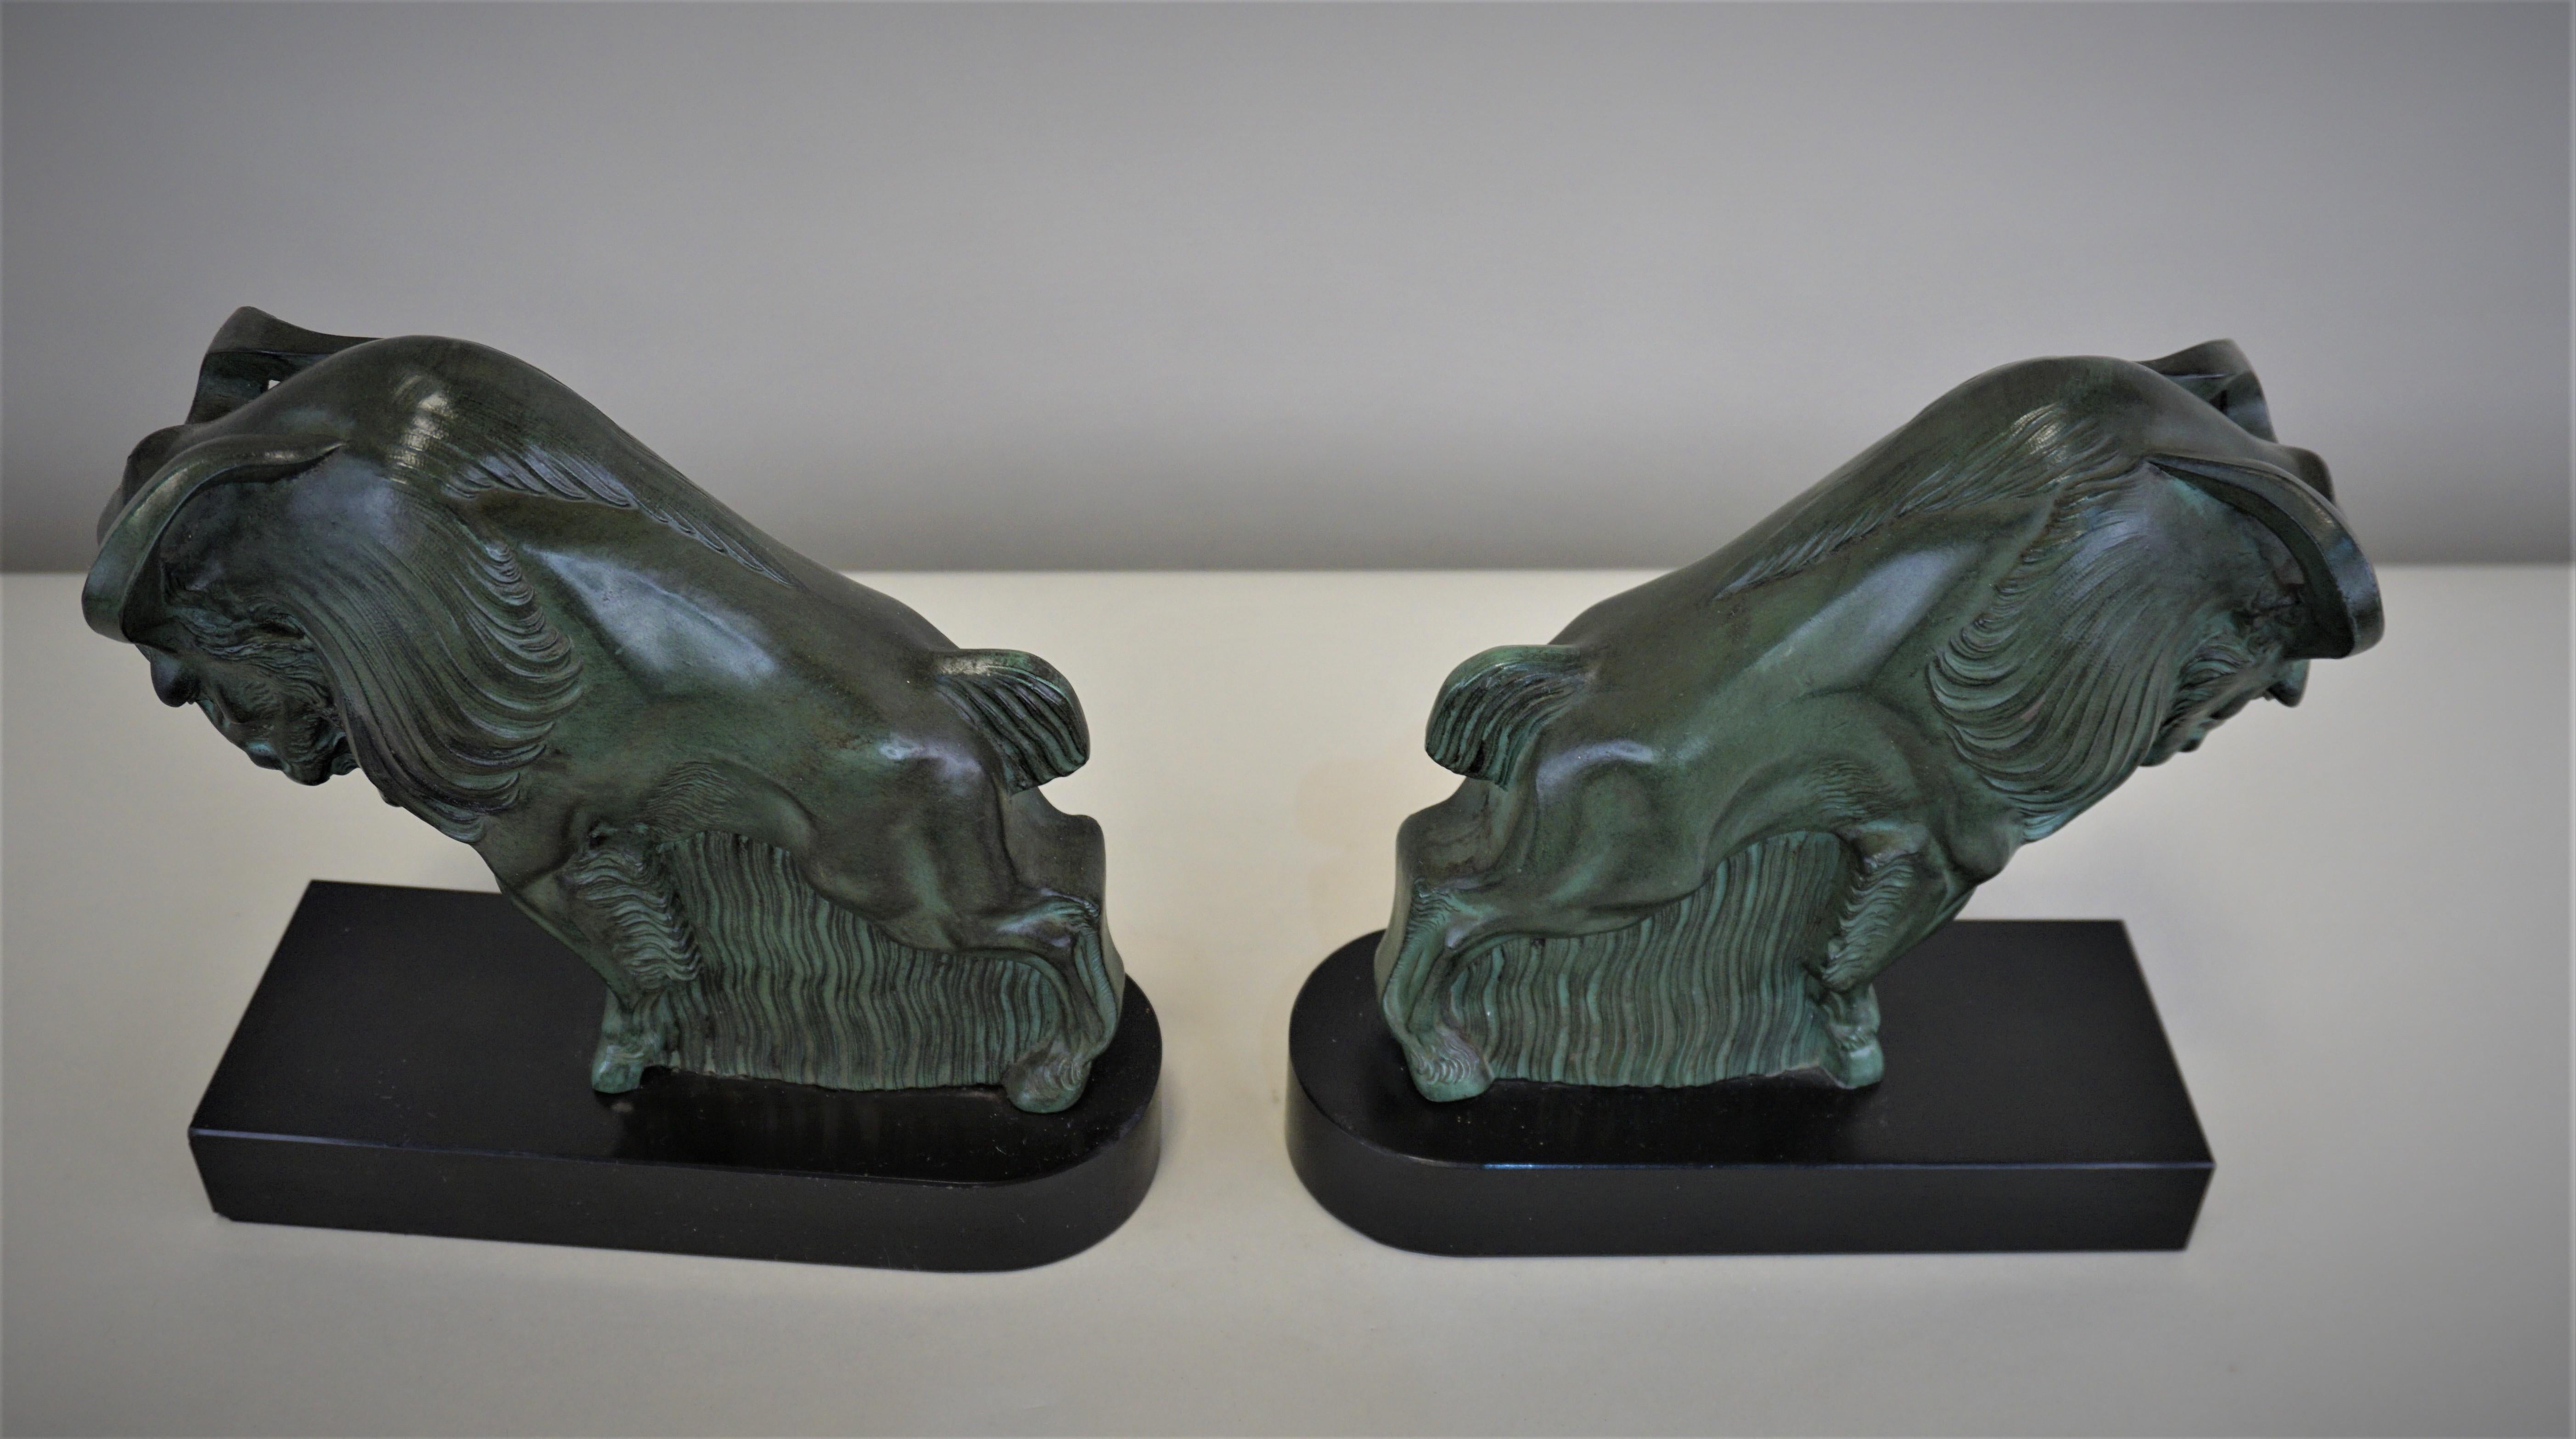 Painted French Art Deco 1930s Buffalo Bookends by Max Le Verrier